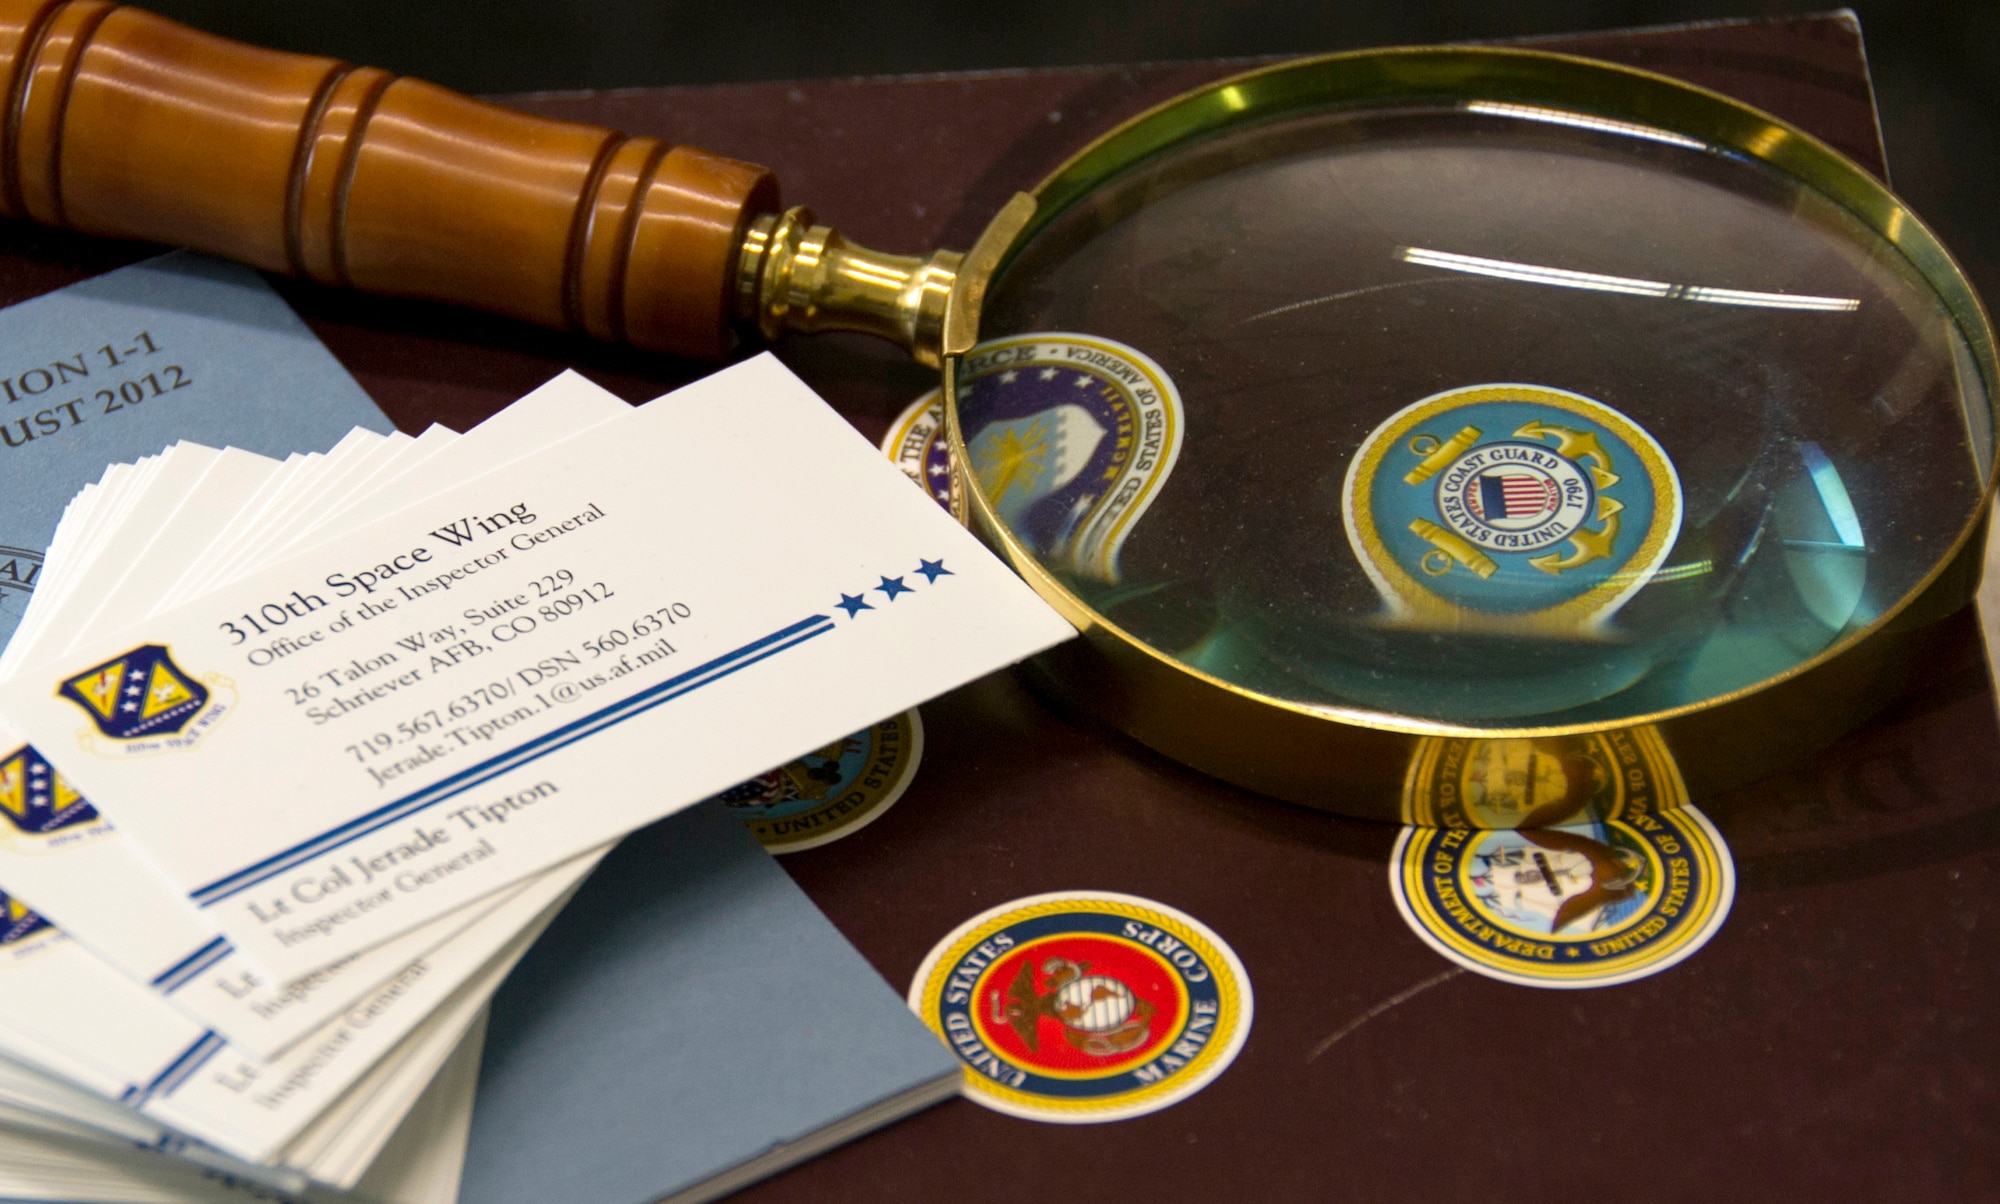 SCHREIVER AIR FORCE BASE, Colo. -- Lt. Col. Jerade Tipton, 310th Space Wing Inspector General Complaints Resolution Management, keeps a magnifying glass on his desk as a reminder to be thorough during each investigation, shown Tuesday, Apr. 18th, 2017. A magnifying glass can also be found on the IG badge, a symbol to identify Inspectors General who have legal authority to audit, investigate, and inquire into all activities of the forces they inspect. (U.S. Air Force photo/Senior Airman Laura Turner)